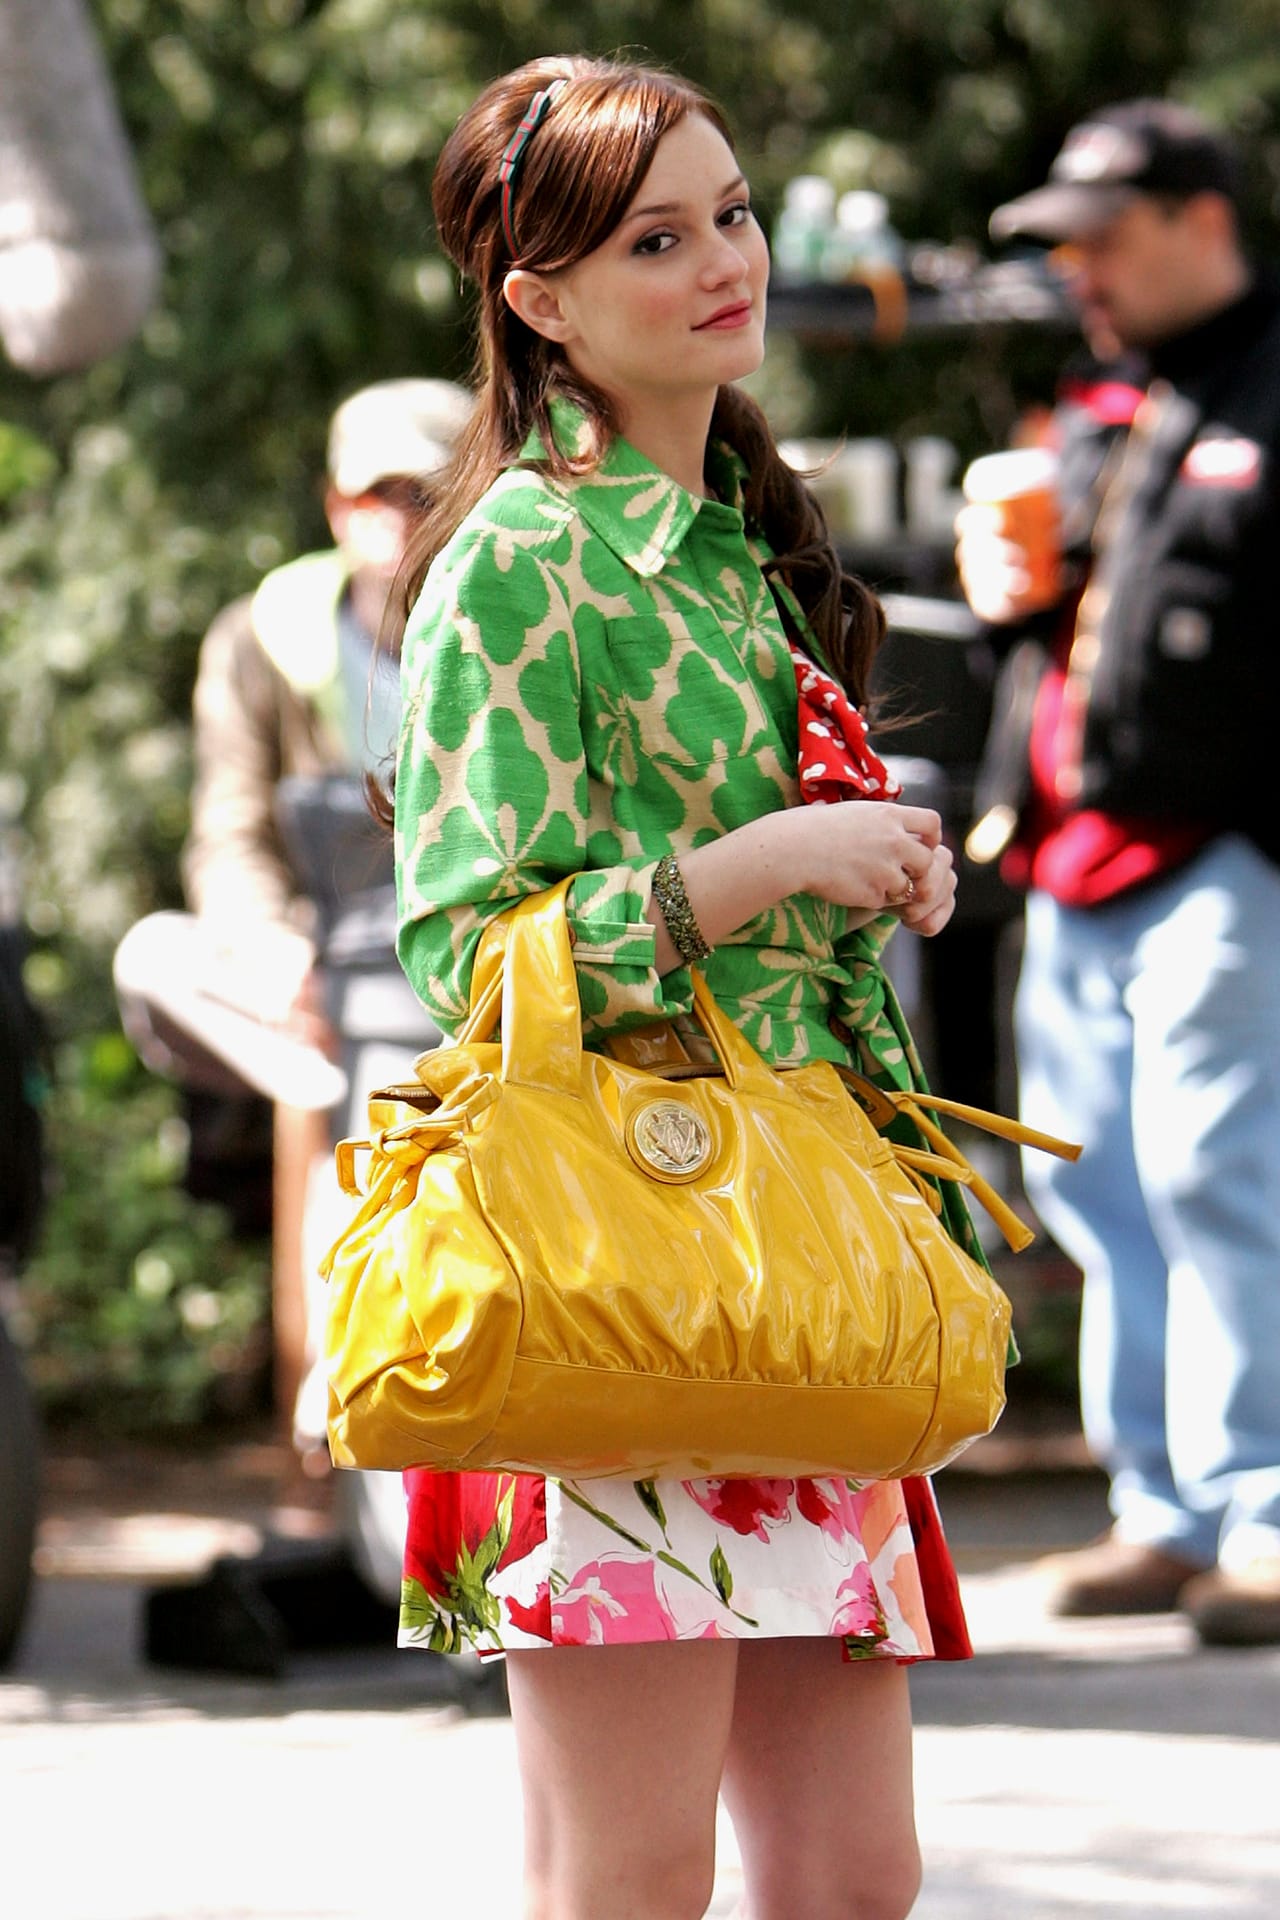 Blair Waldorf Favorite Designers - The 12 Most Iconic Outfits From Gossip G...